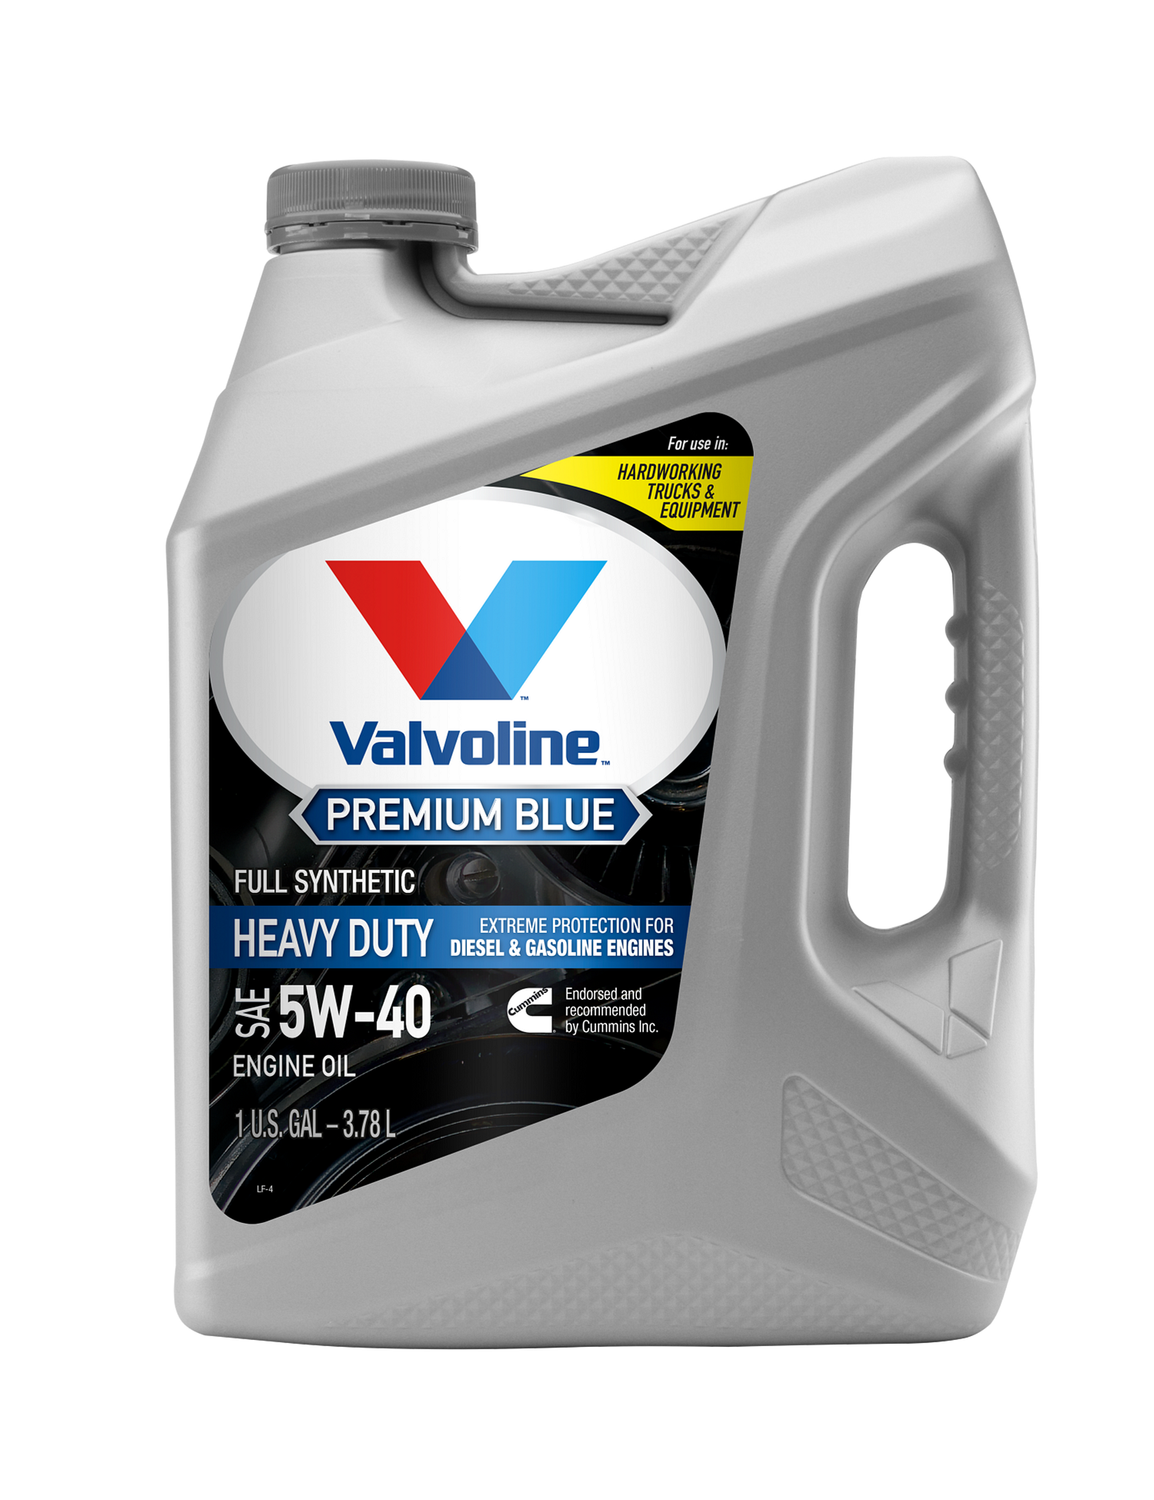 Valvoline Motor OIl - Buy 2, get 3rd free (5W-40 Synthetic Diesel oil - $65.98 for 3 gallons) - Free Shipping